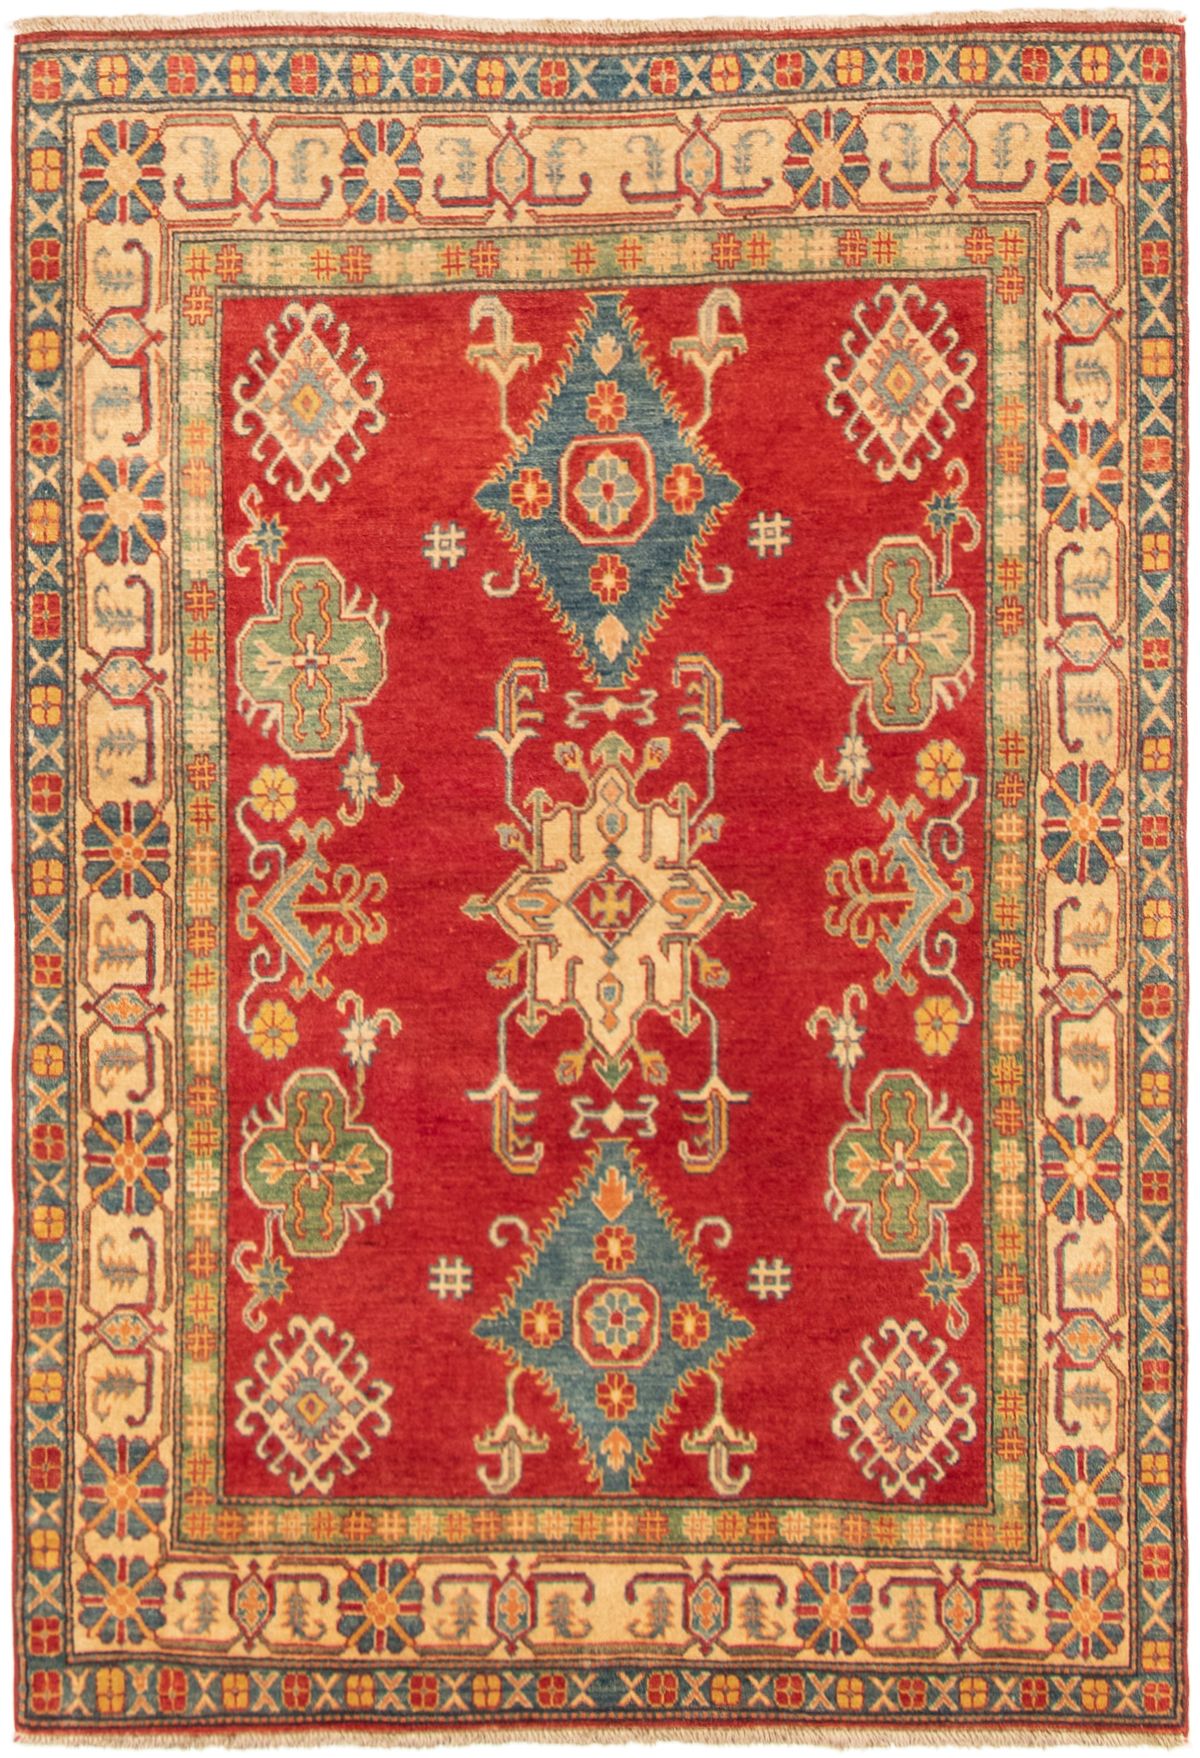 Hand-knotted Finest Gazni Red Wool Rug 4'9" x 6'10"  Size: 4'9" x 6'10"  